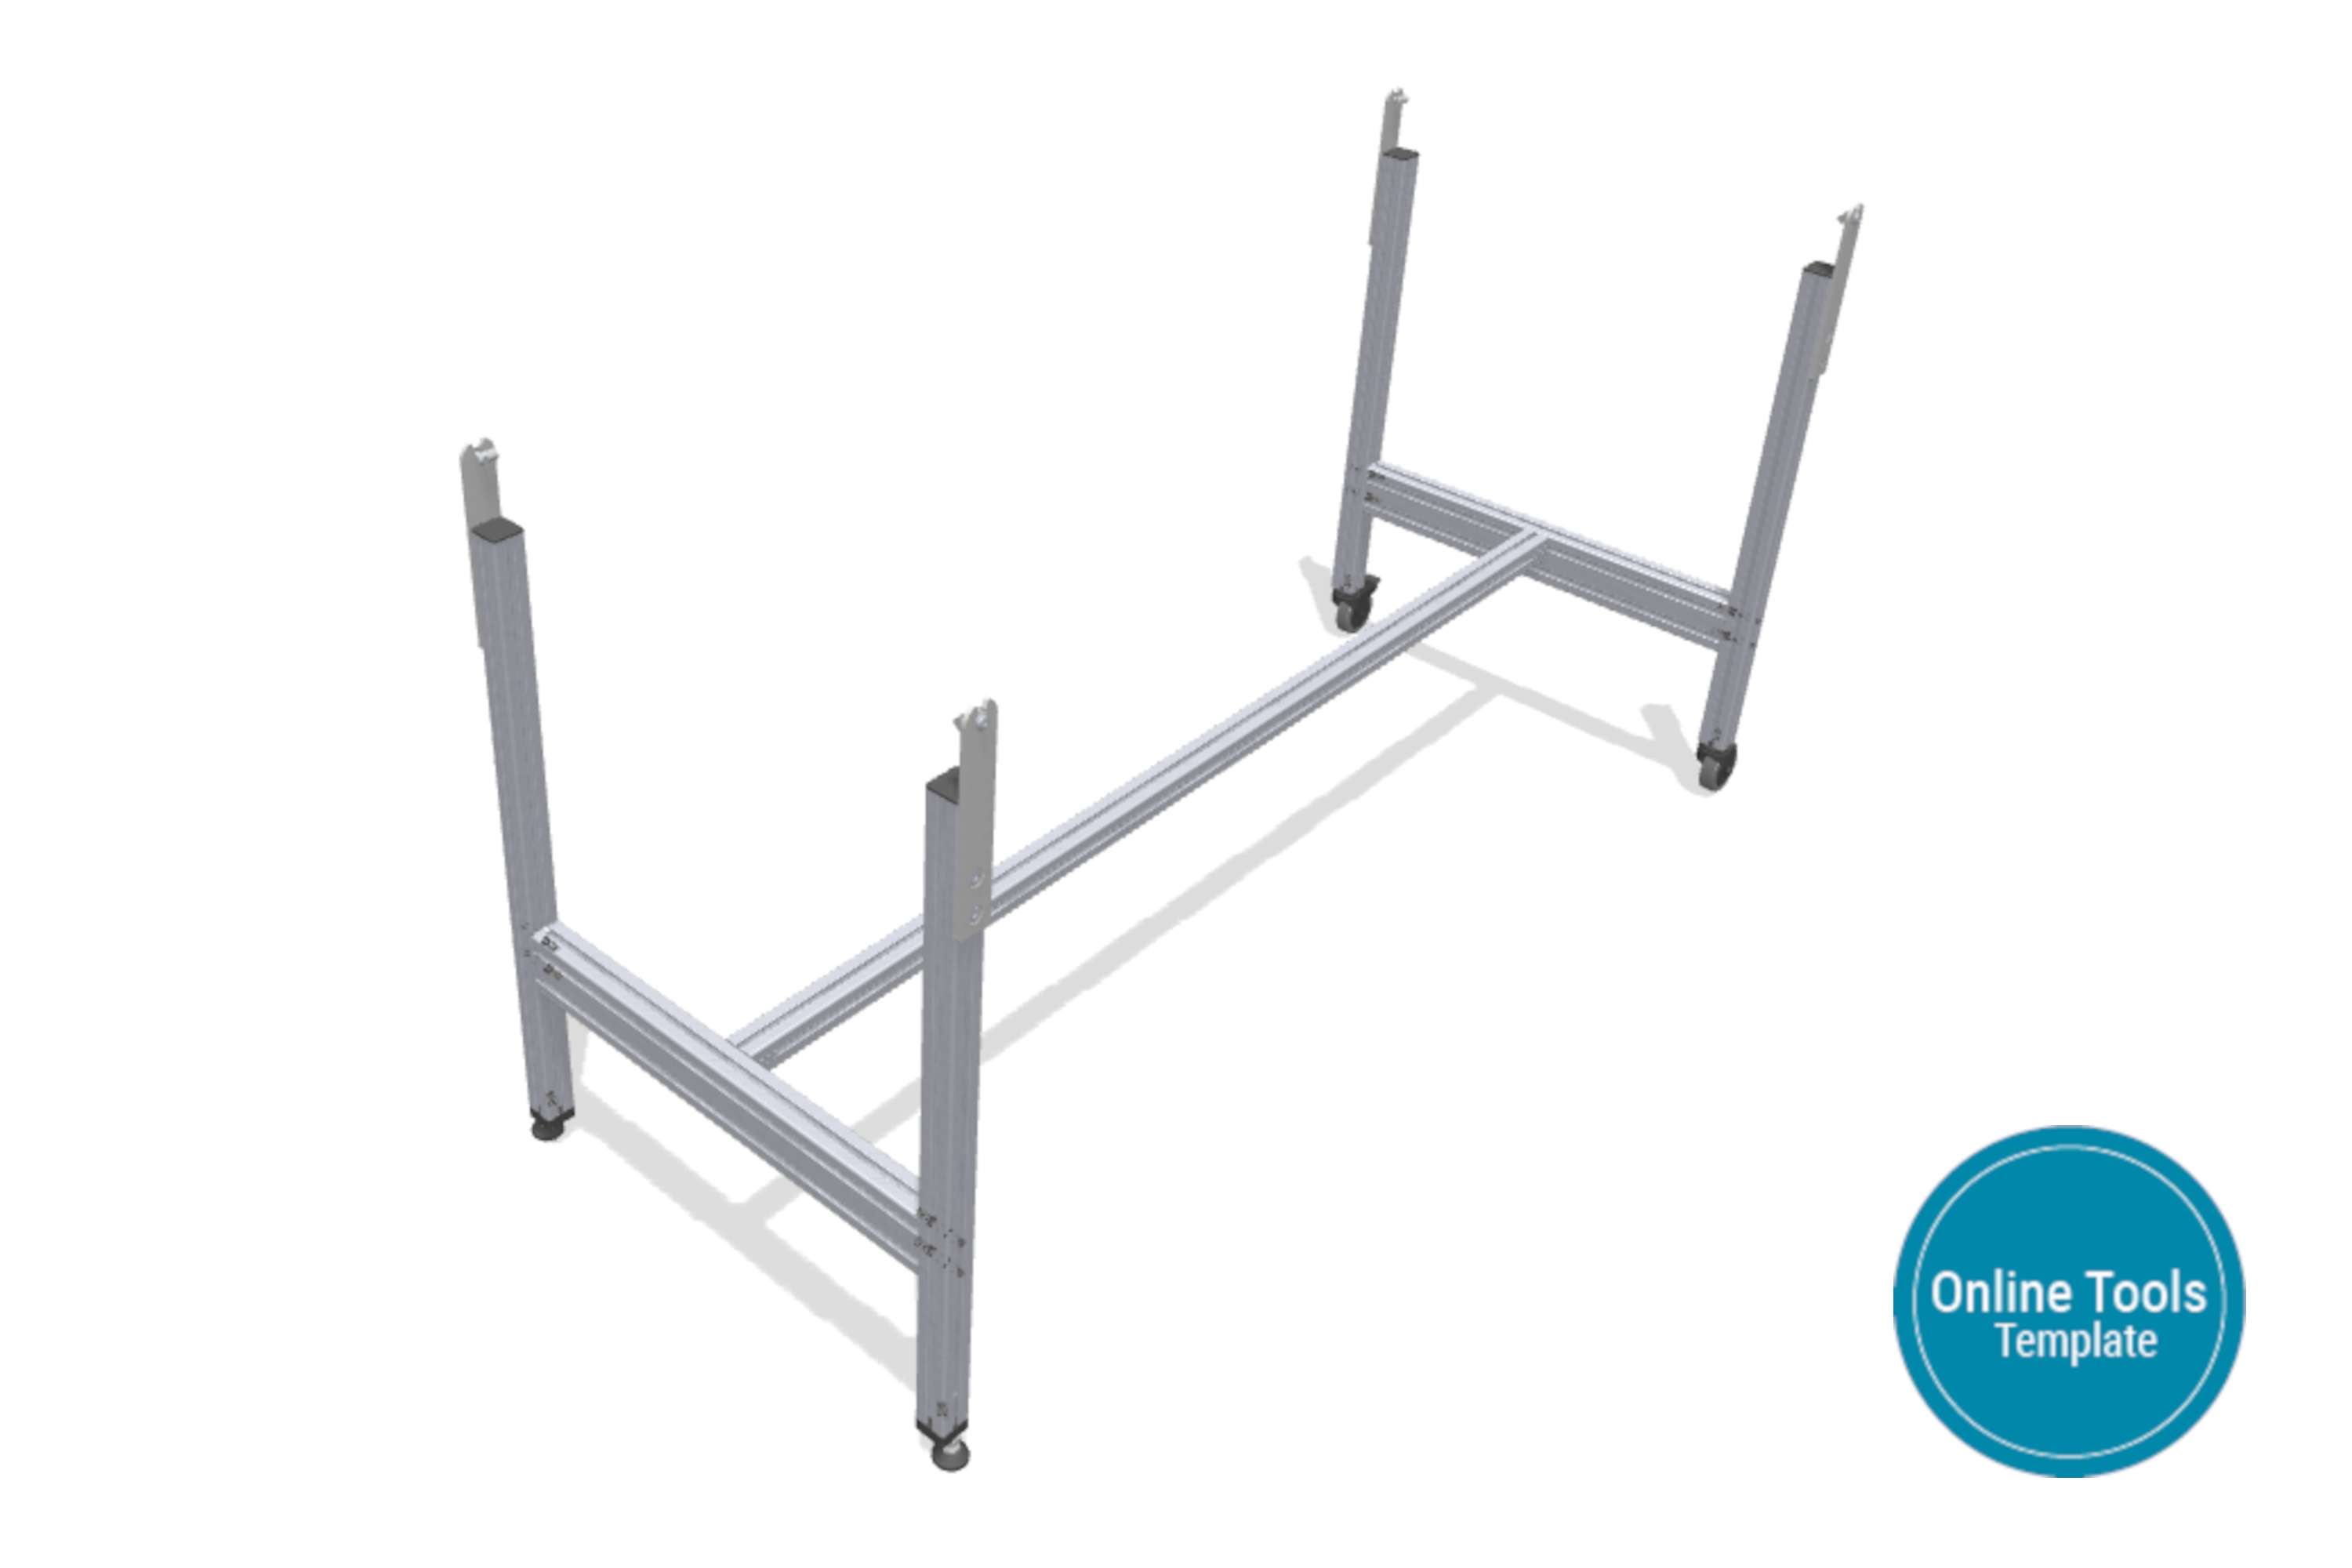 H-stand frame - width and incline configurable